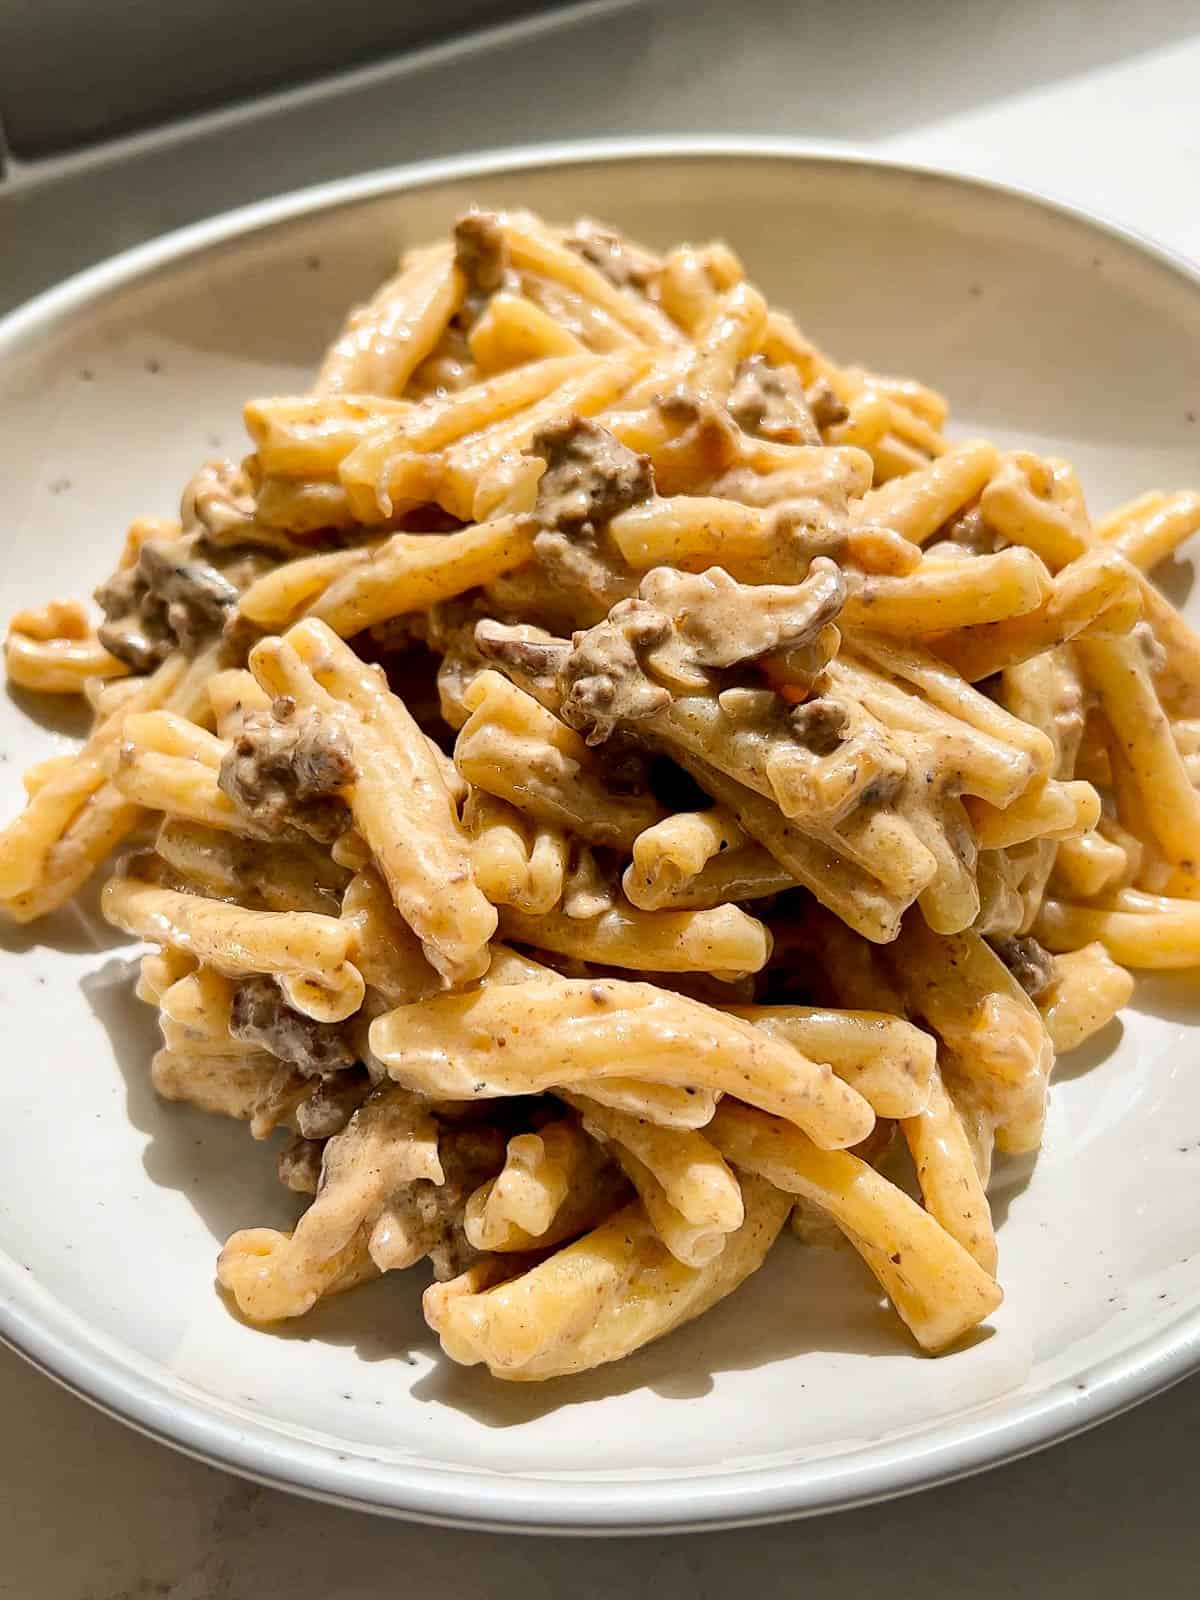 a ceramic bowl with a pasta dish made with ground beef, mushrooms, onions, and a sour cream sauce.